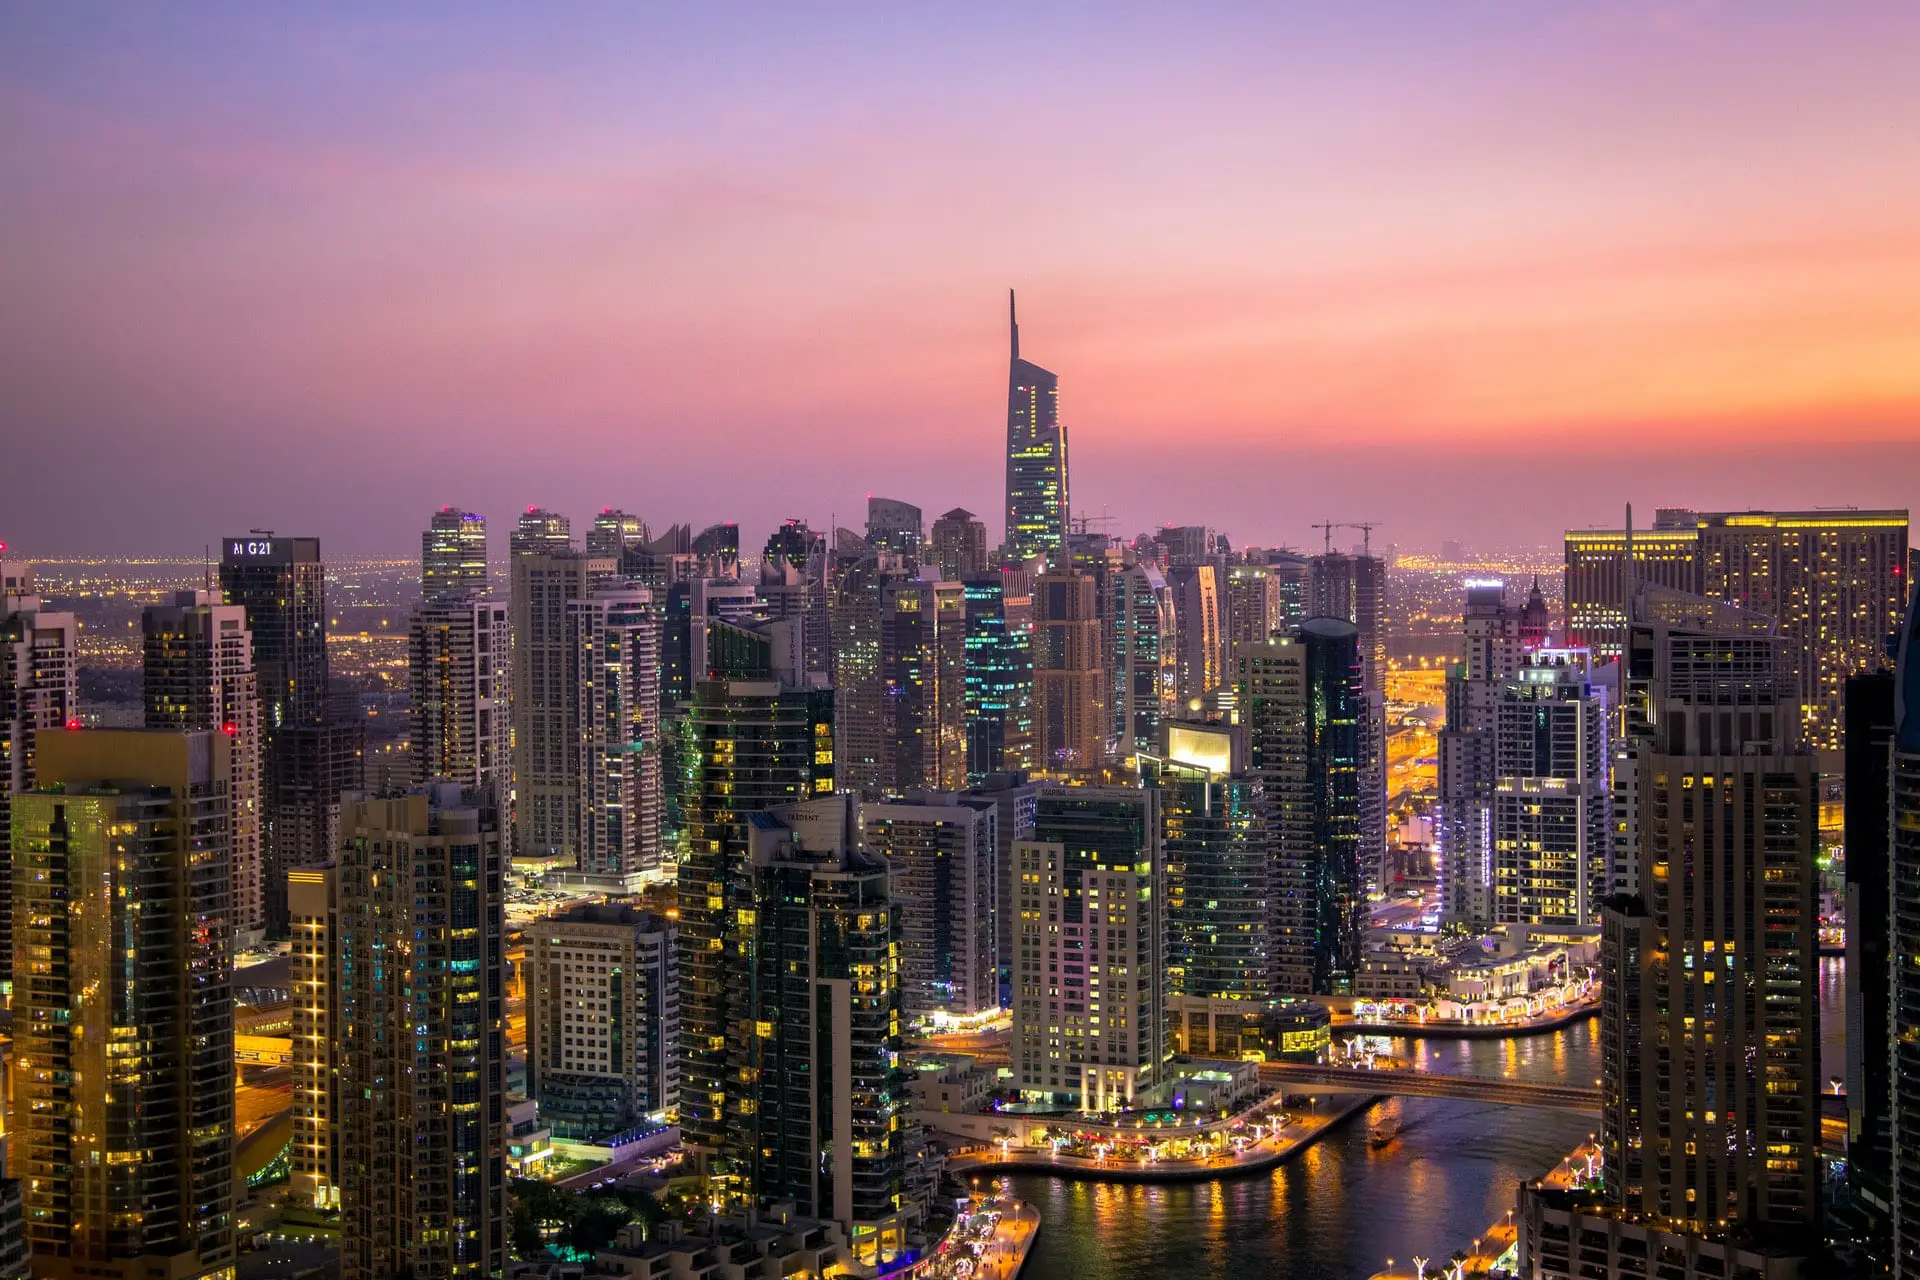 How to get a job in Dubai - 6 easy steps to land the job fast